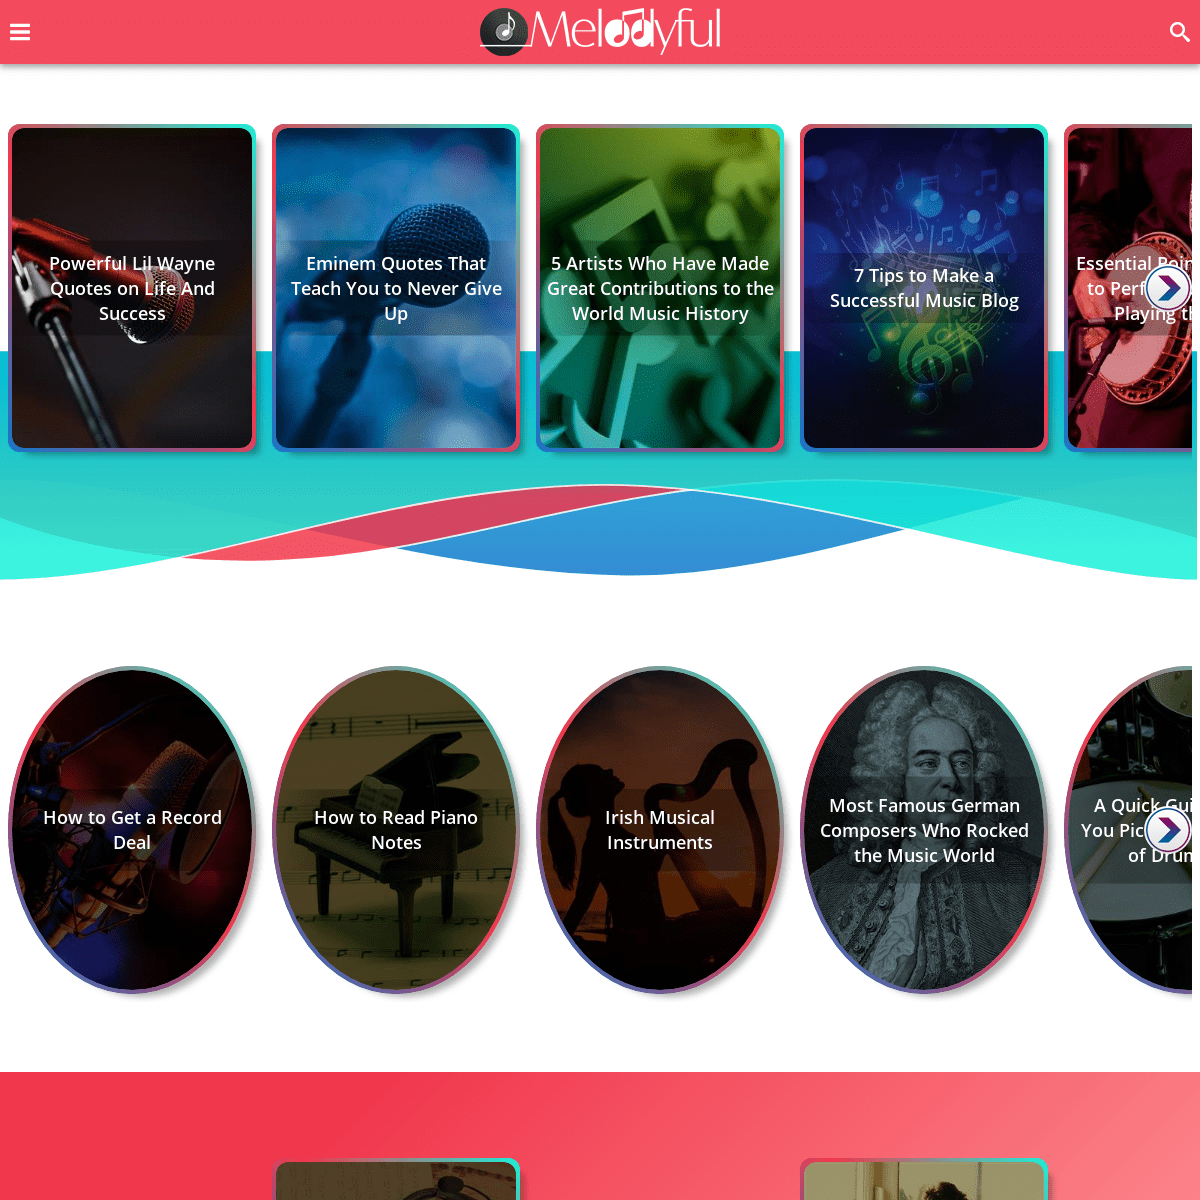 Melodyful | Learn Music & Instruments, Top Songs, Genres, Famous Artists